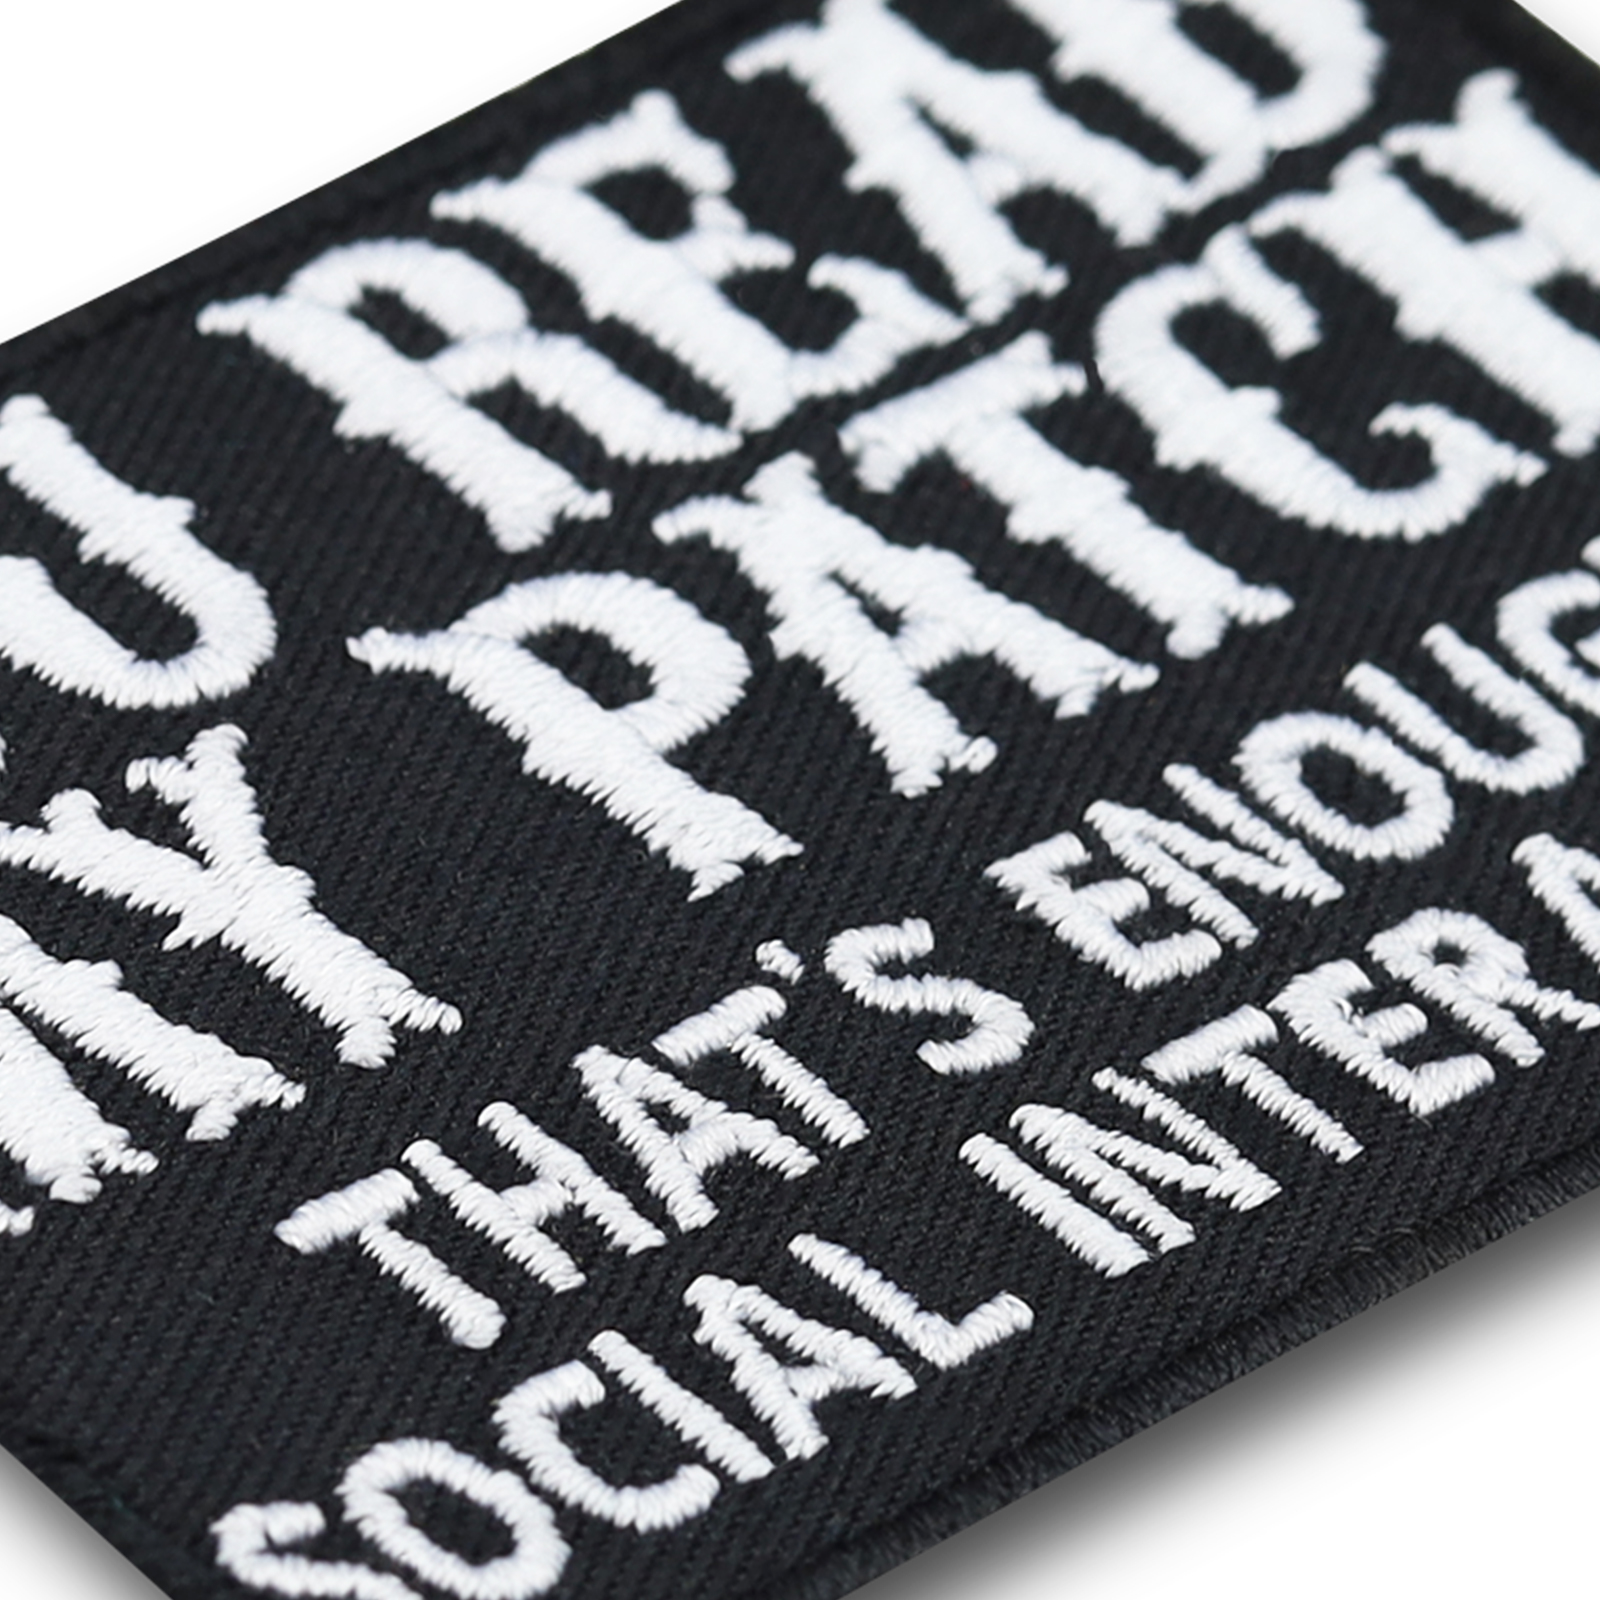 You read my patch, that's enough social interaction - Patch